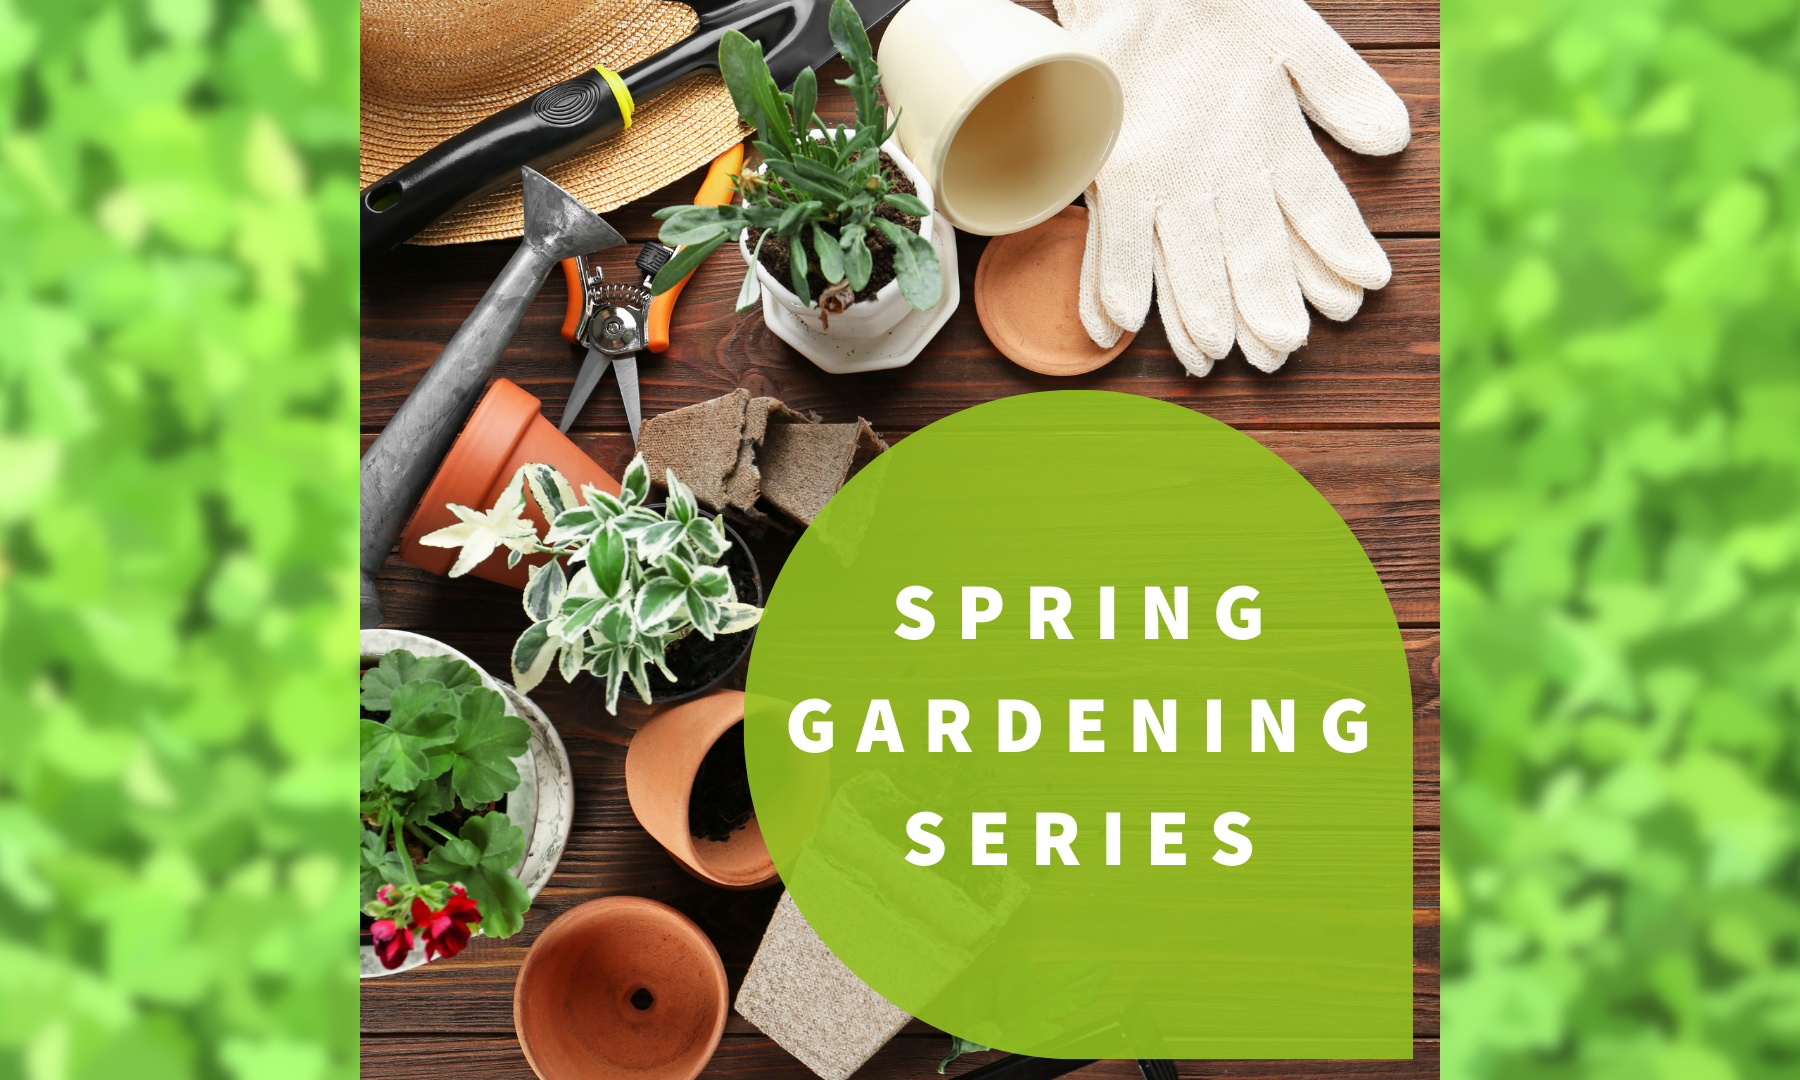 Gardening supplies arranged on a wooden table, text reads "Spring Gardening Series"